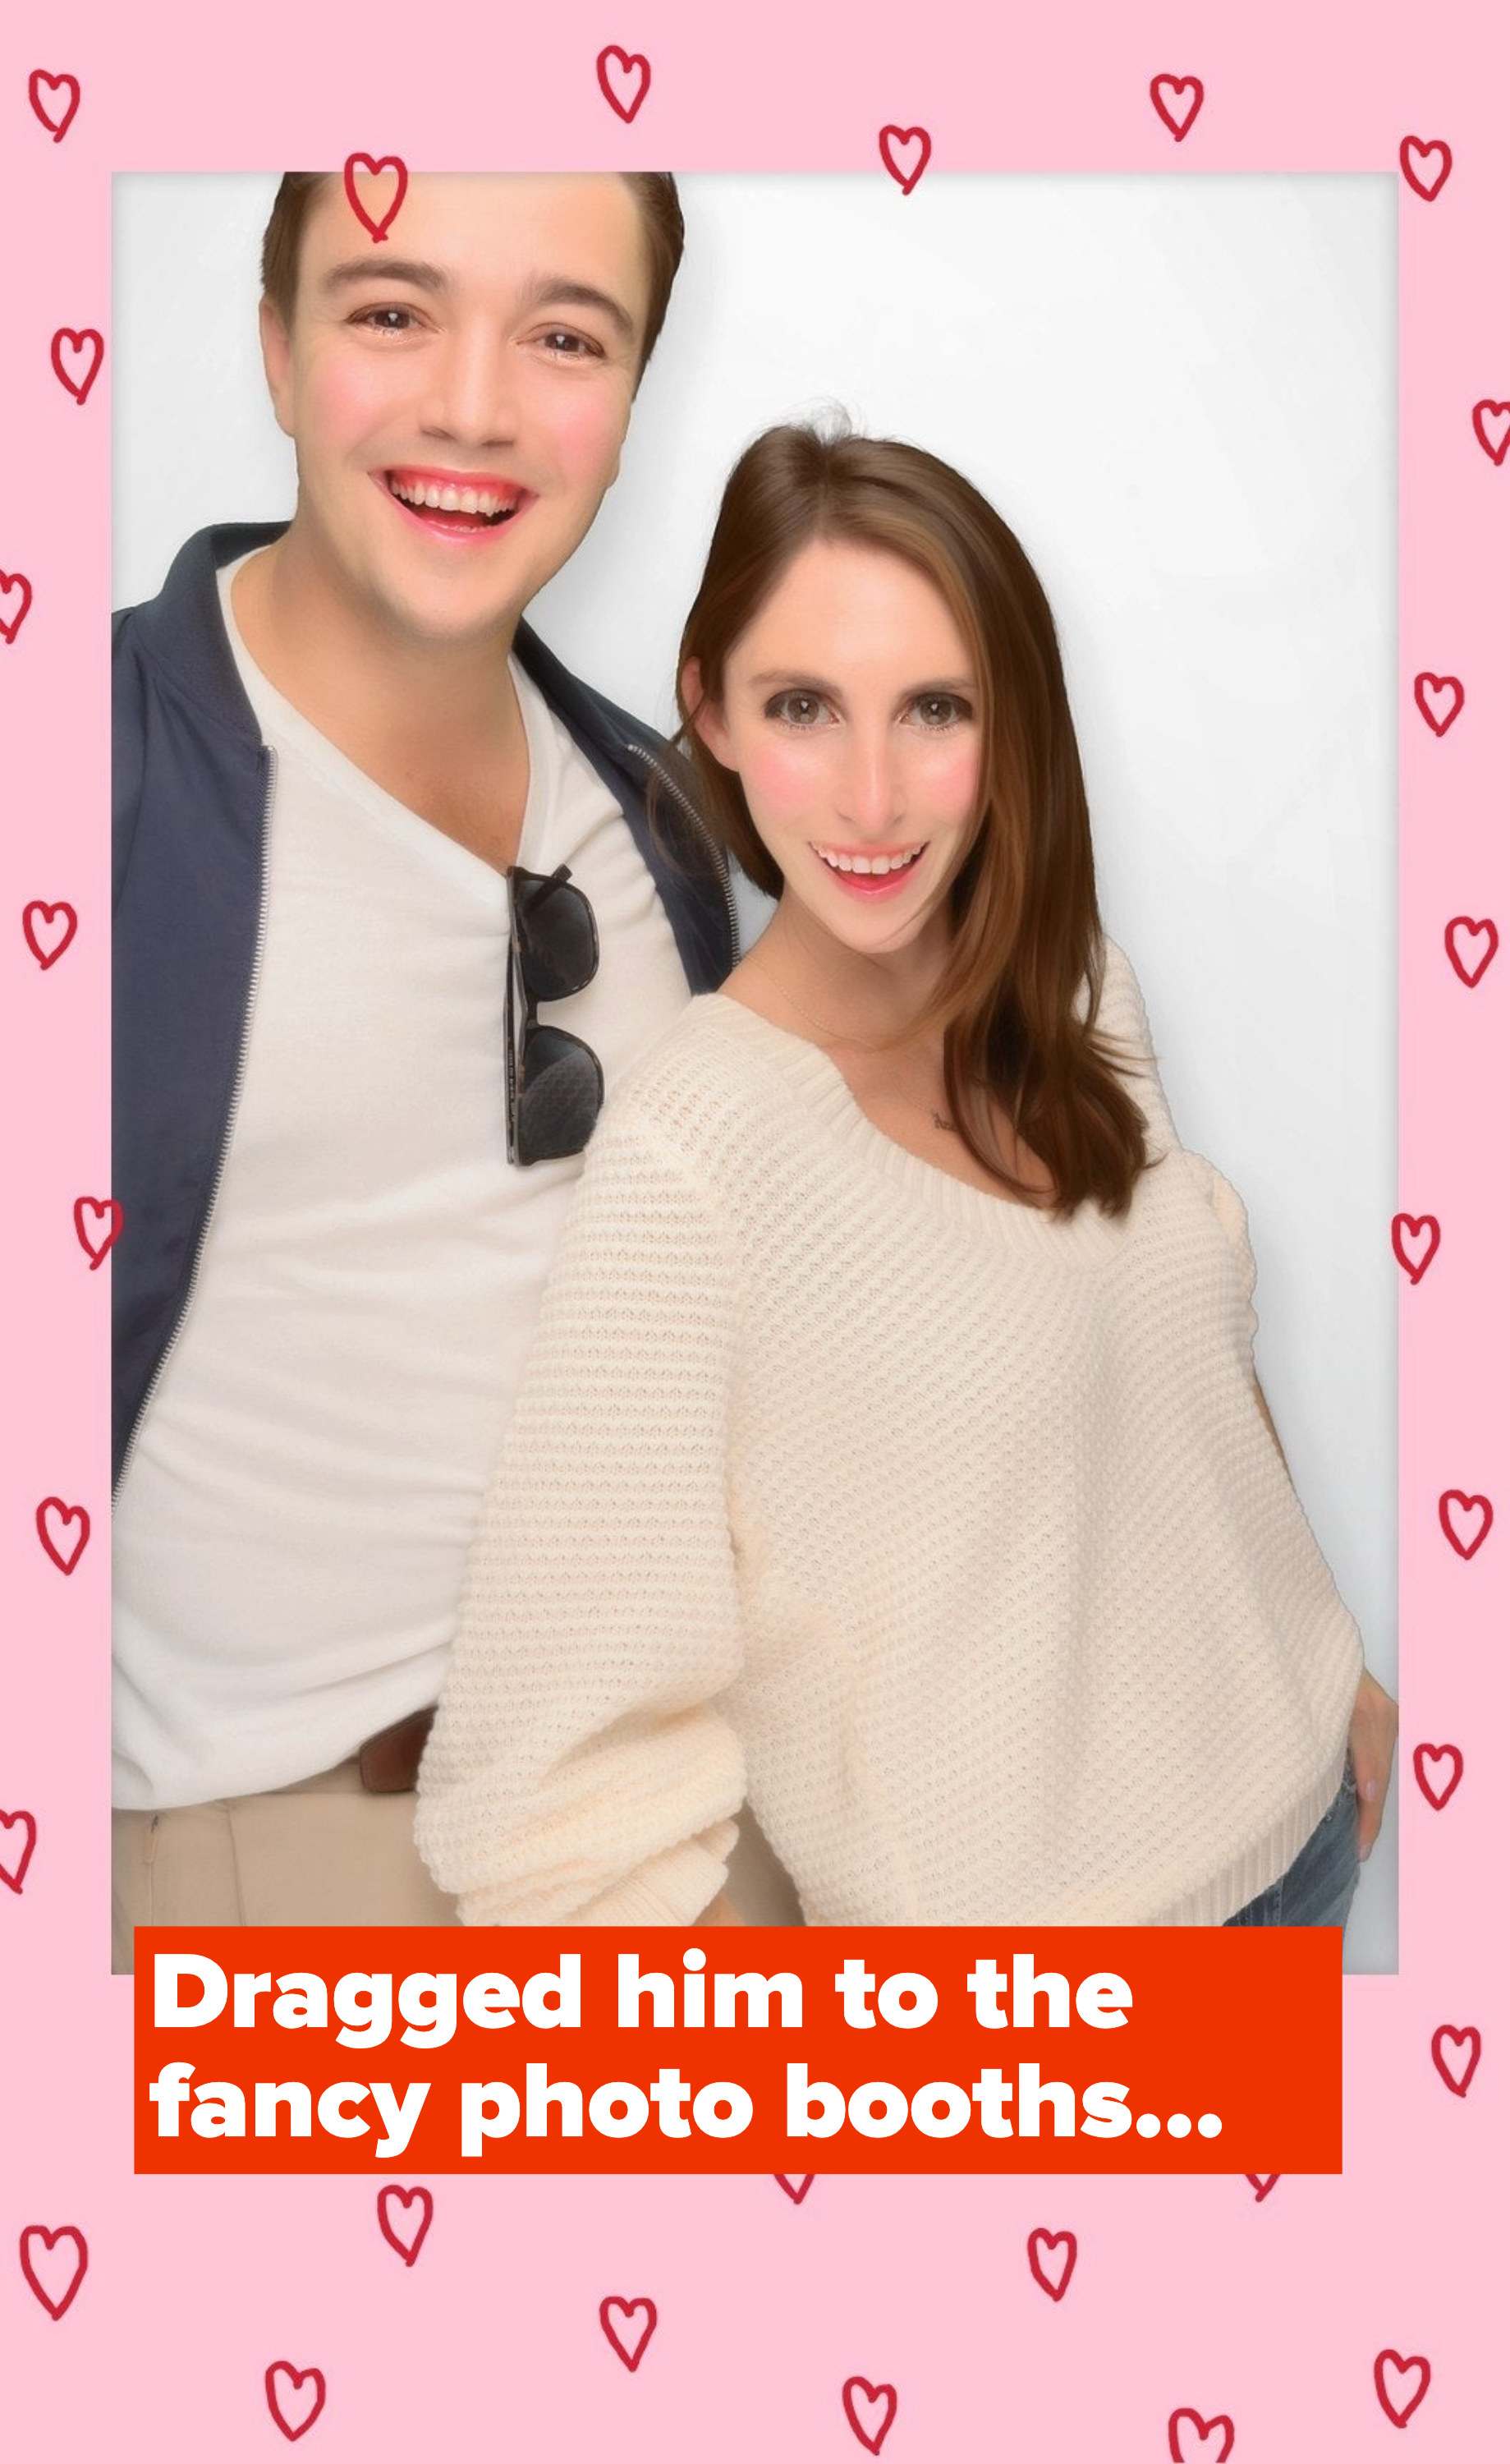 A photo of me and my husband from a Japanese photo booth.